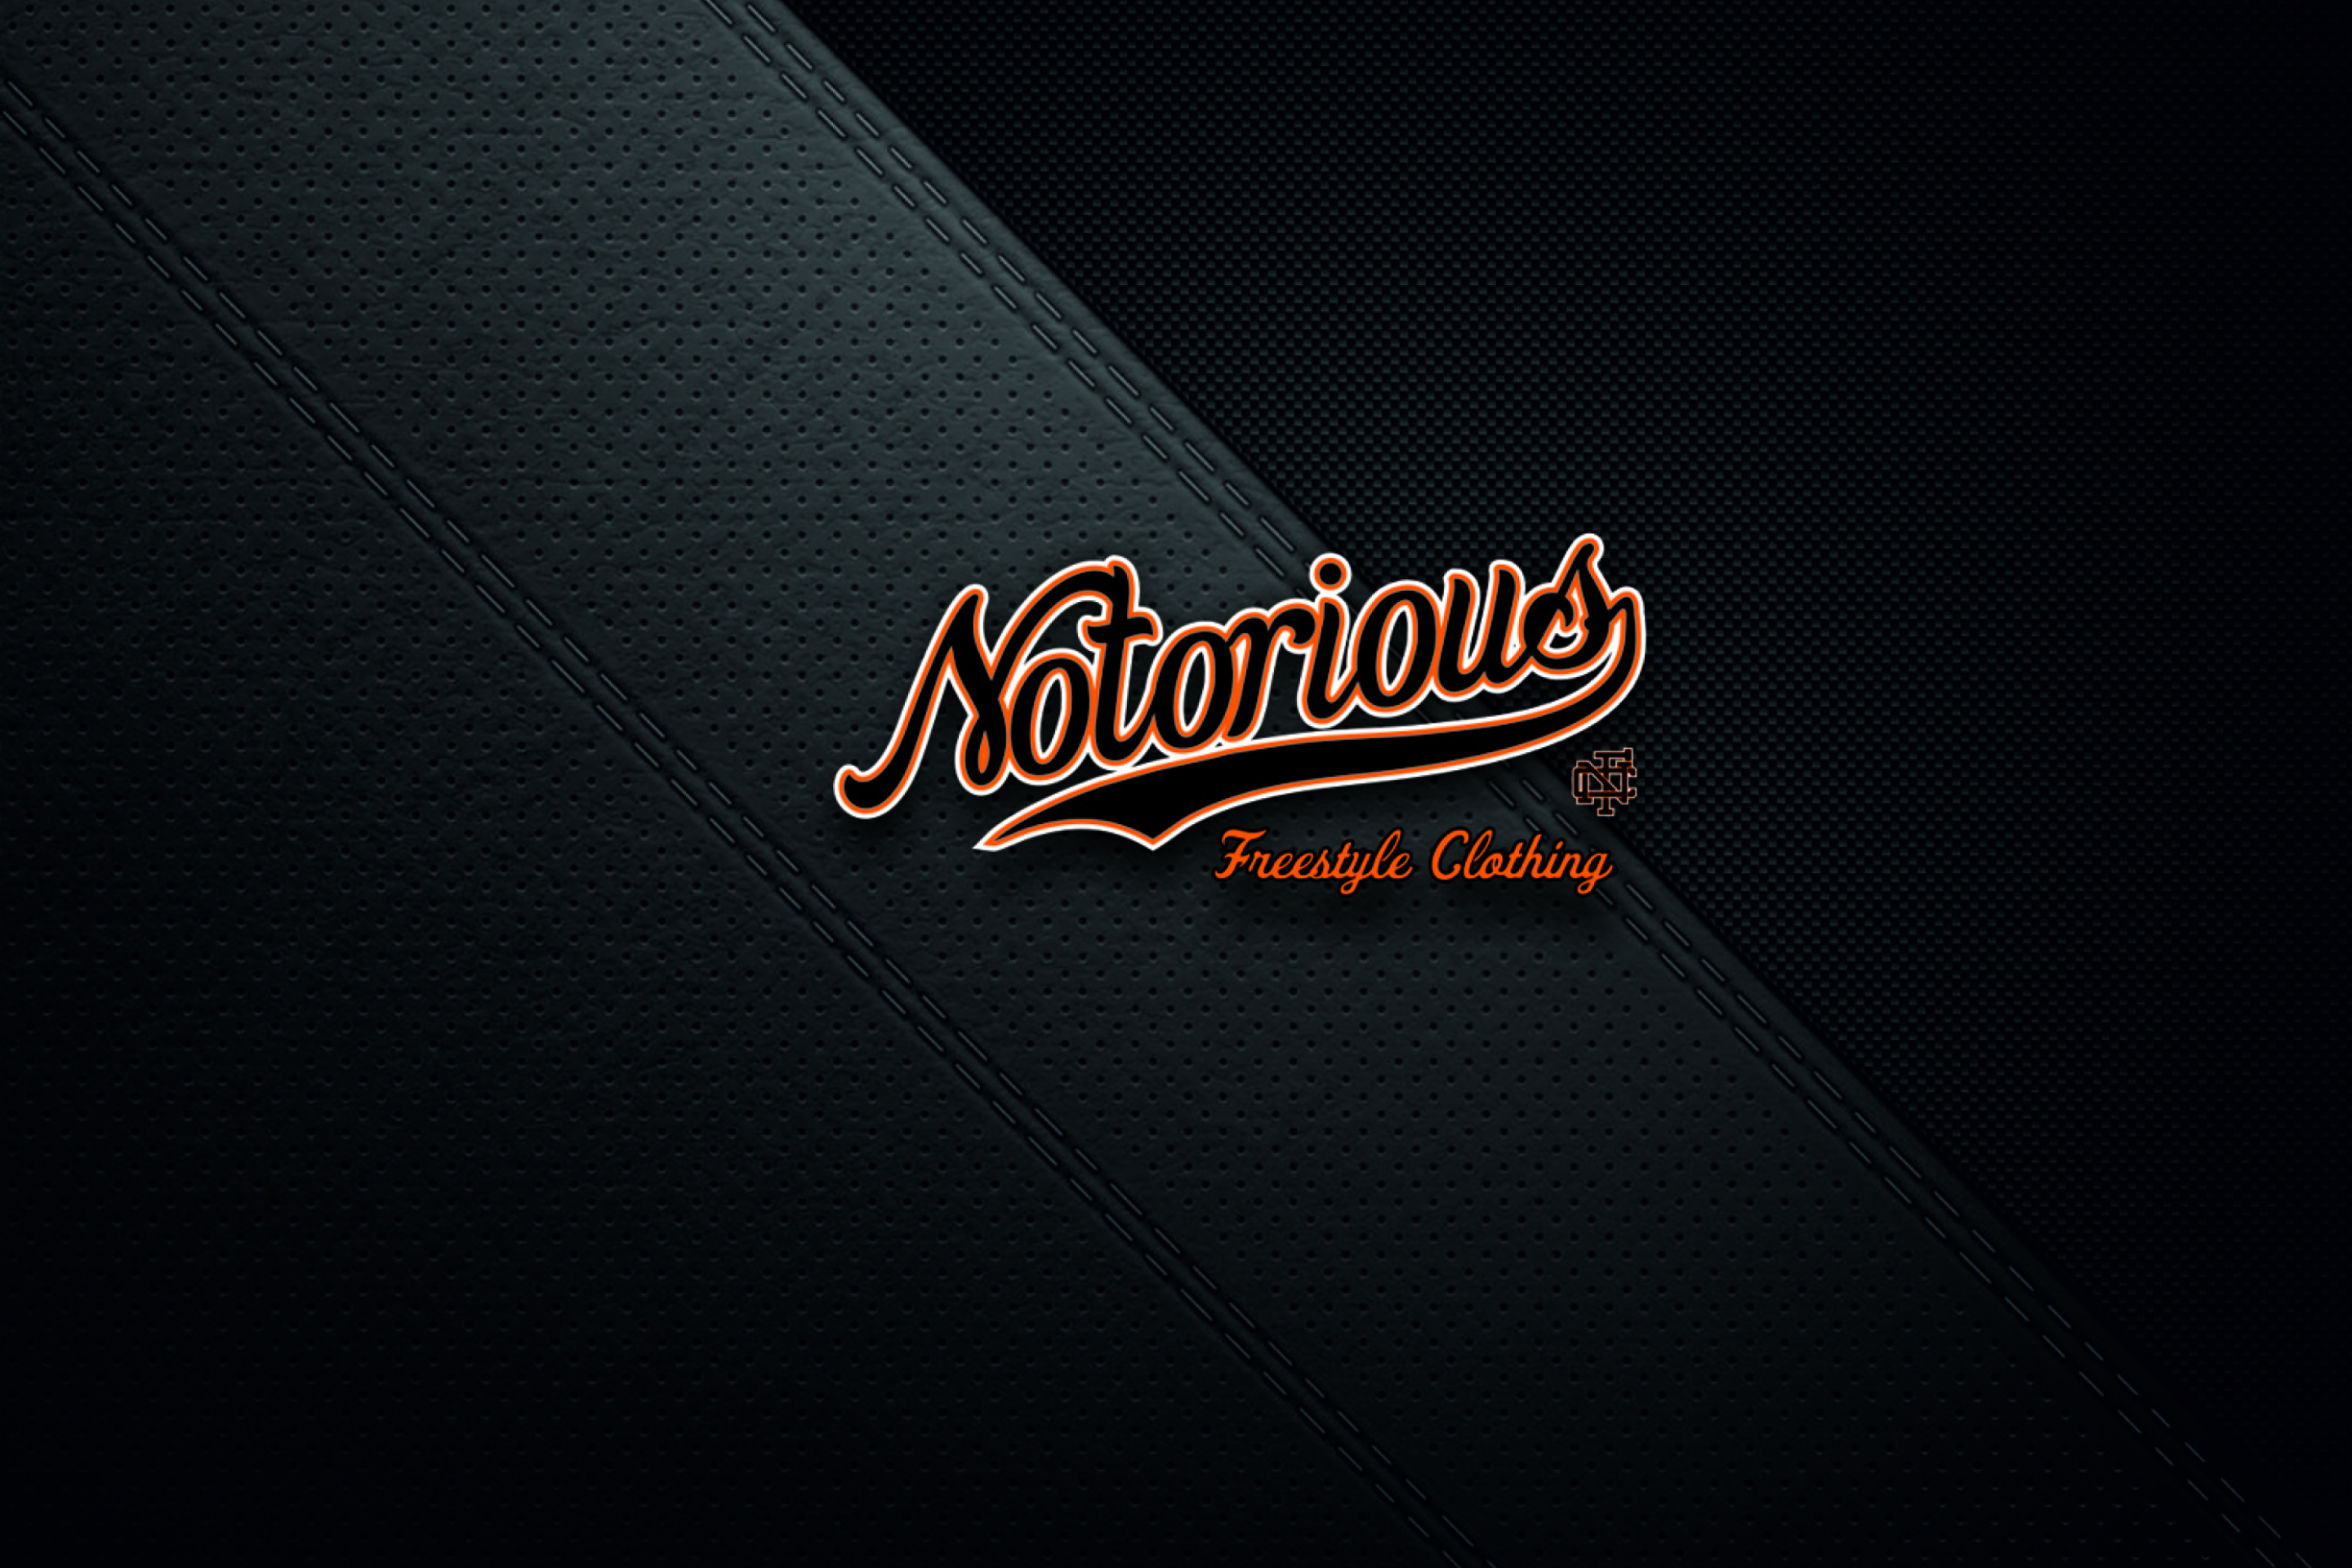 Notorious Freestyle Clothes screenshot #1 2880x1920